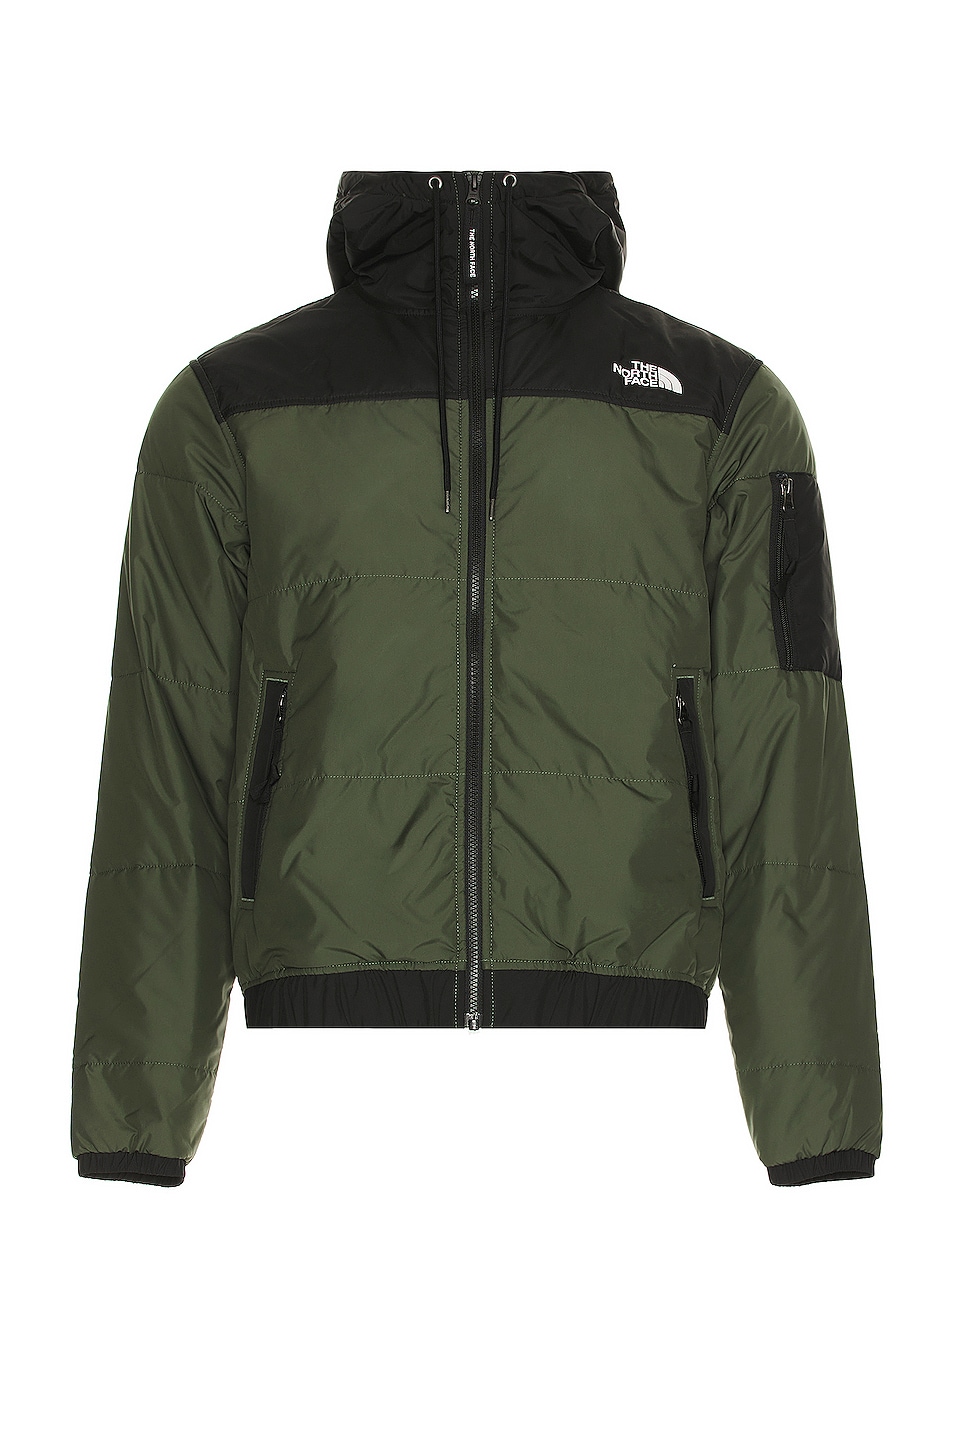 The North Face Highrail Bomber Jacket in Thyme | FWRD